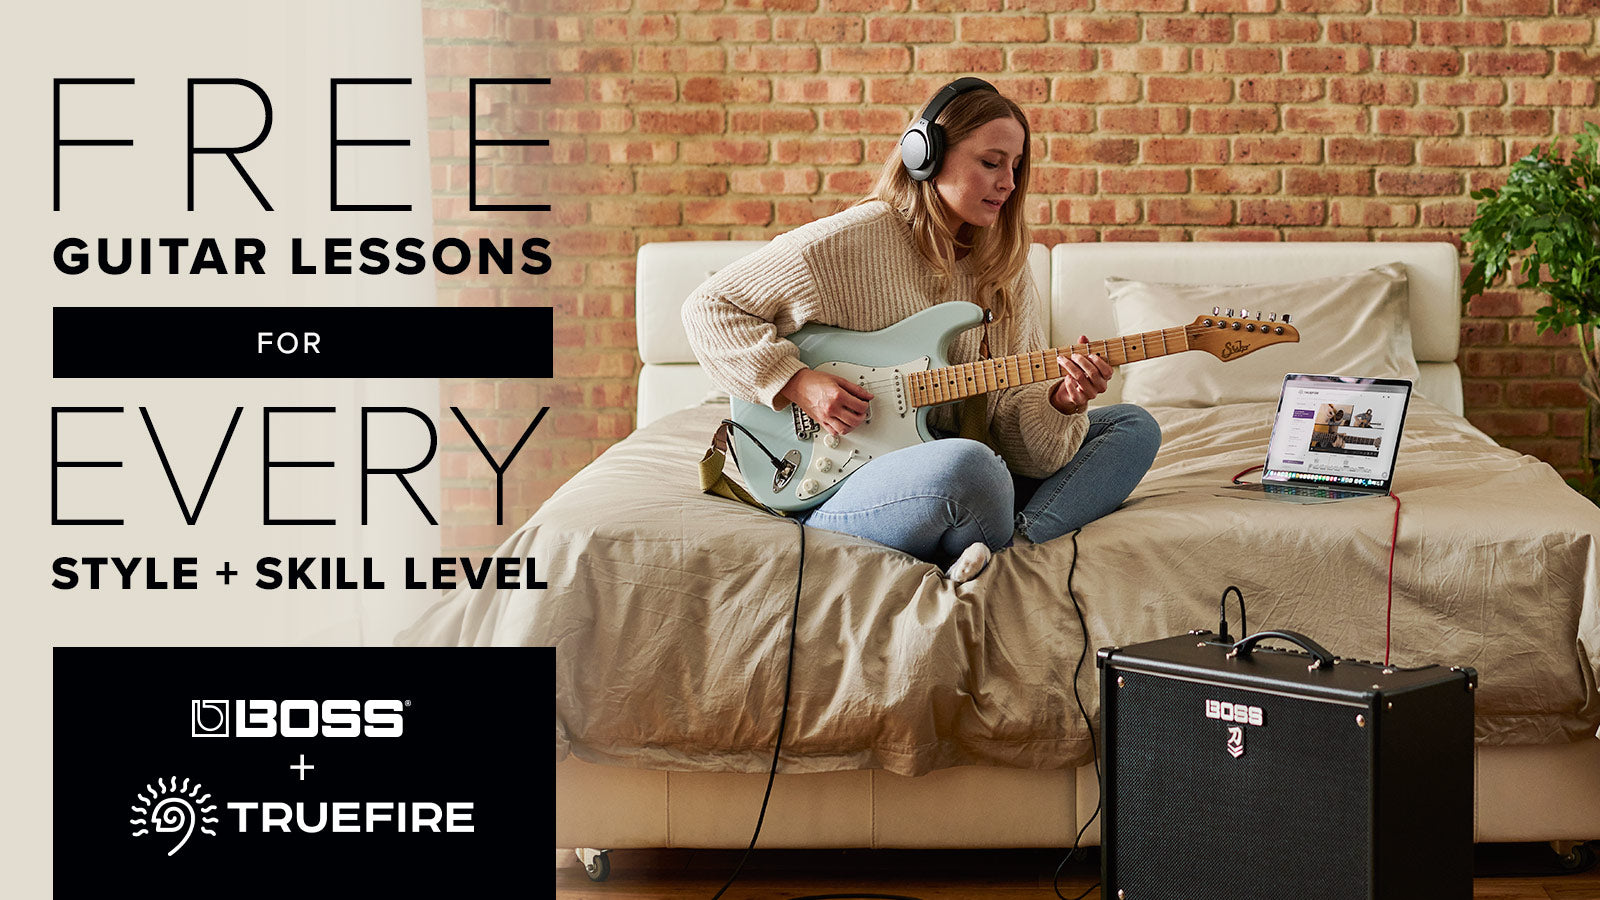 Image of woman playing guitar with text: Free Guitar Lessons for every style + skill level. Boss + Truefire